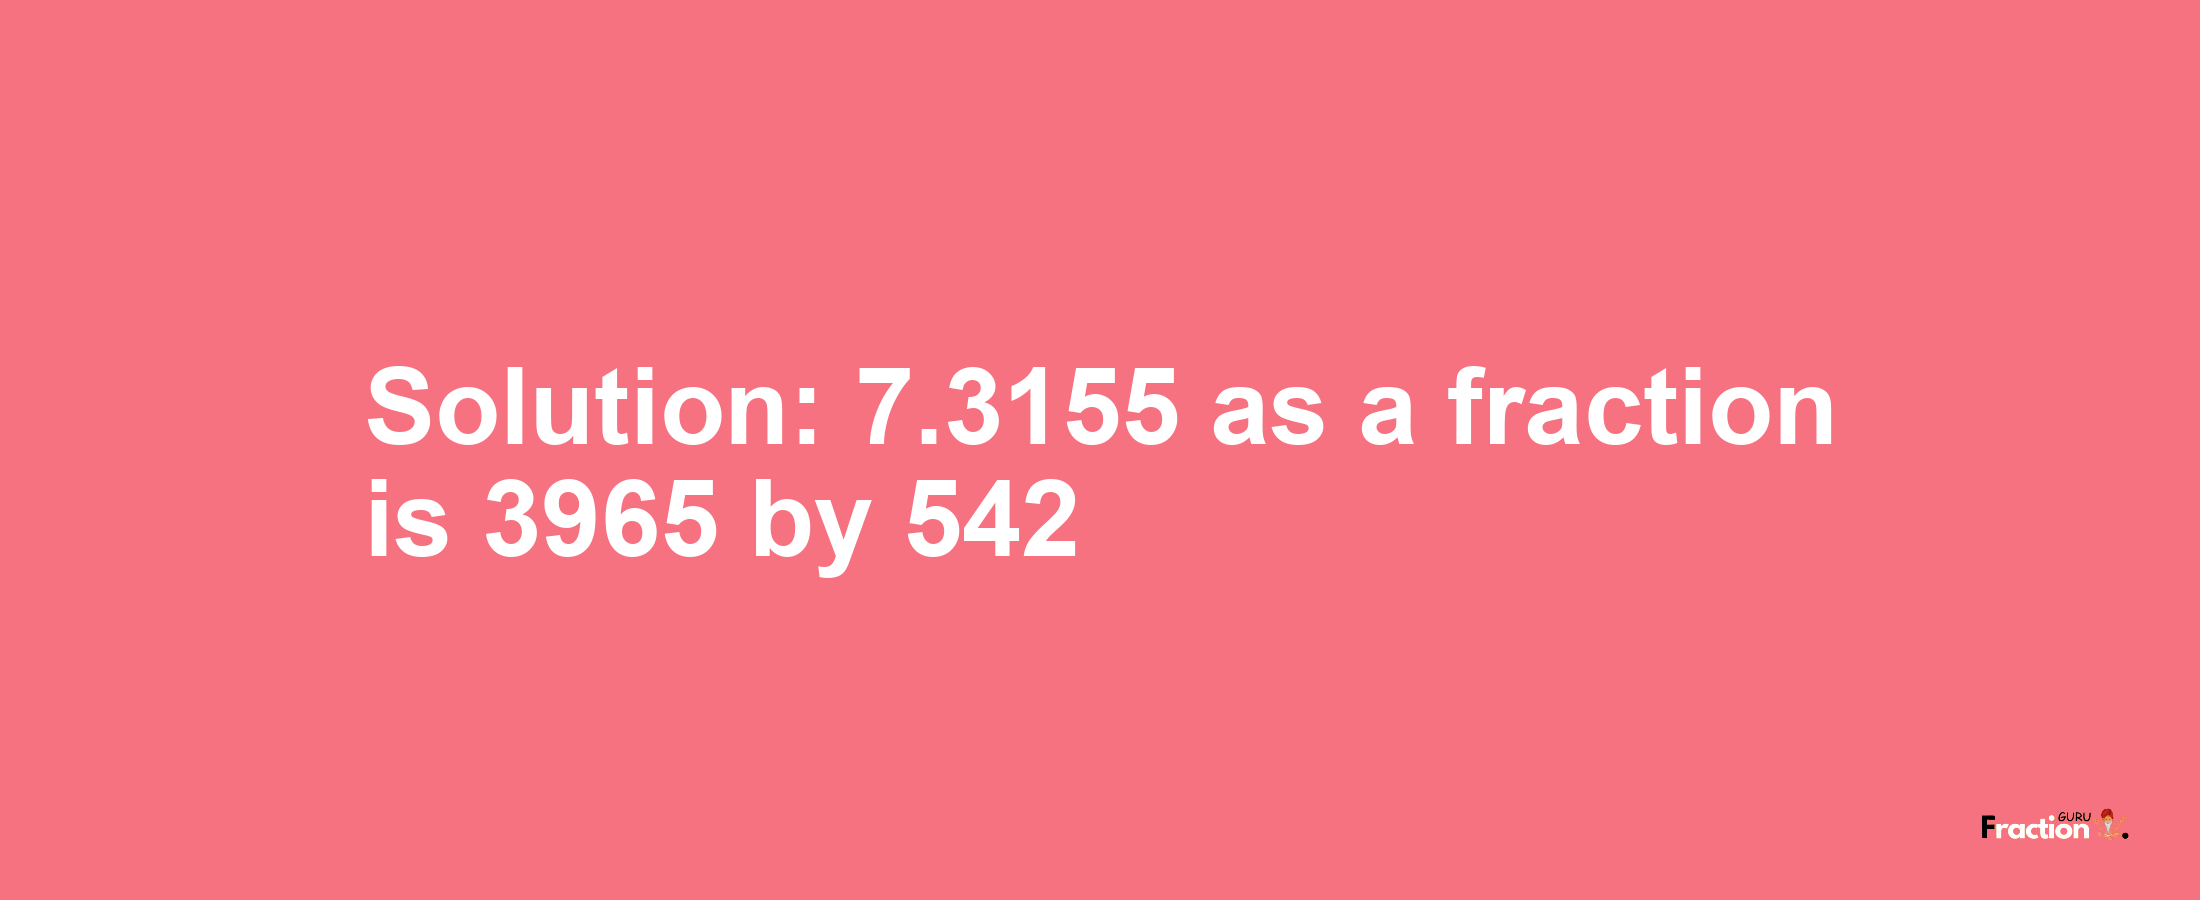 Solution:7.3155 as a fraction is 3965/542